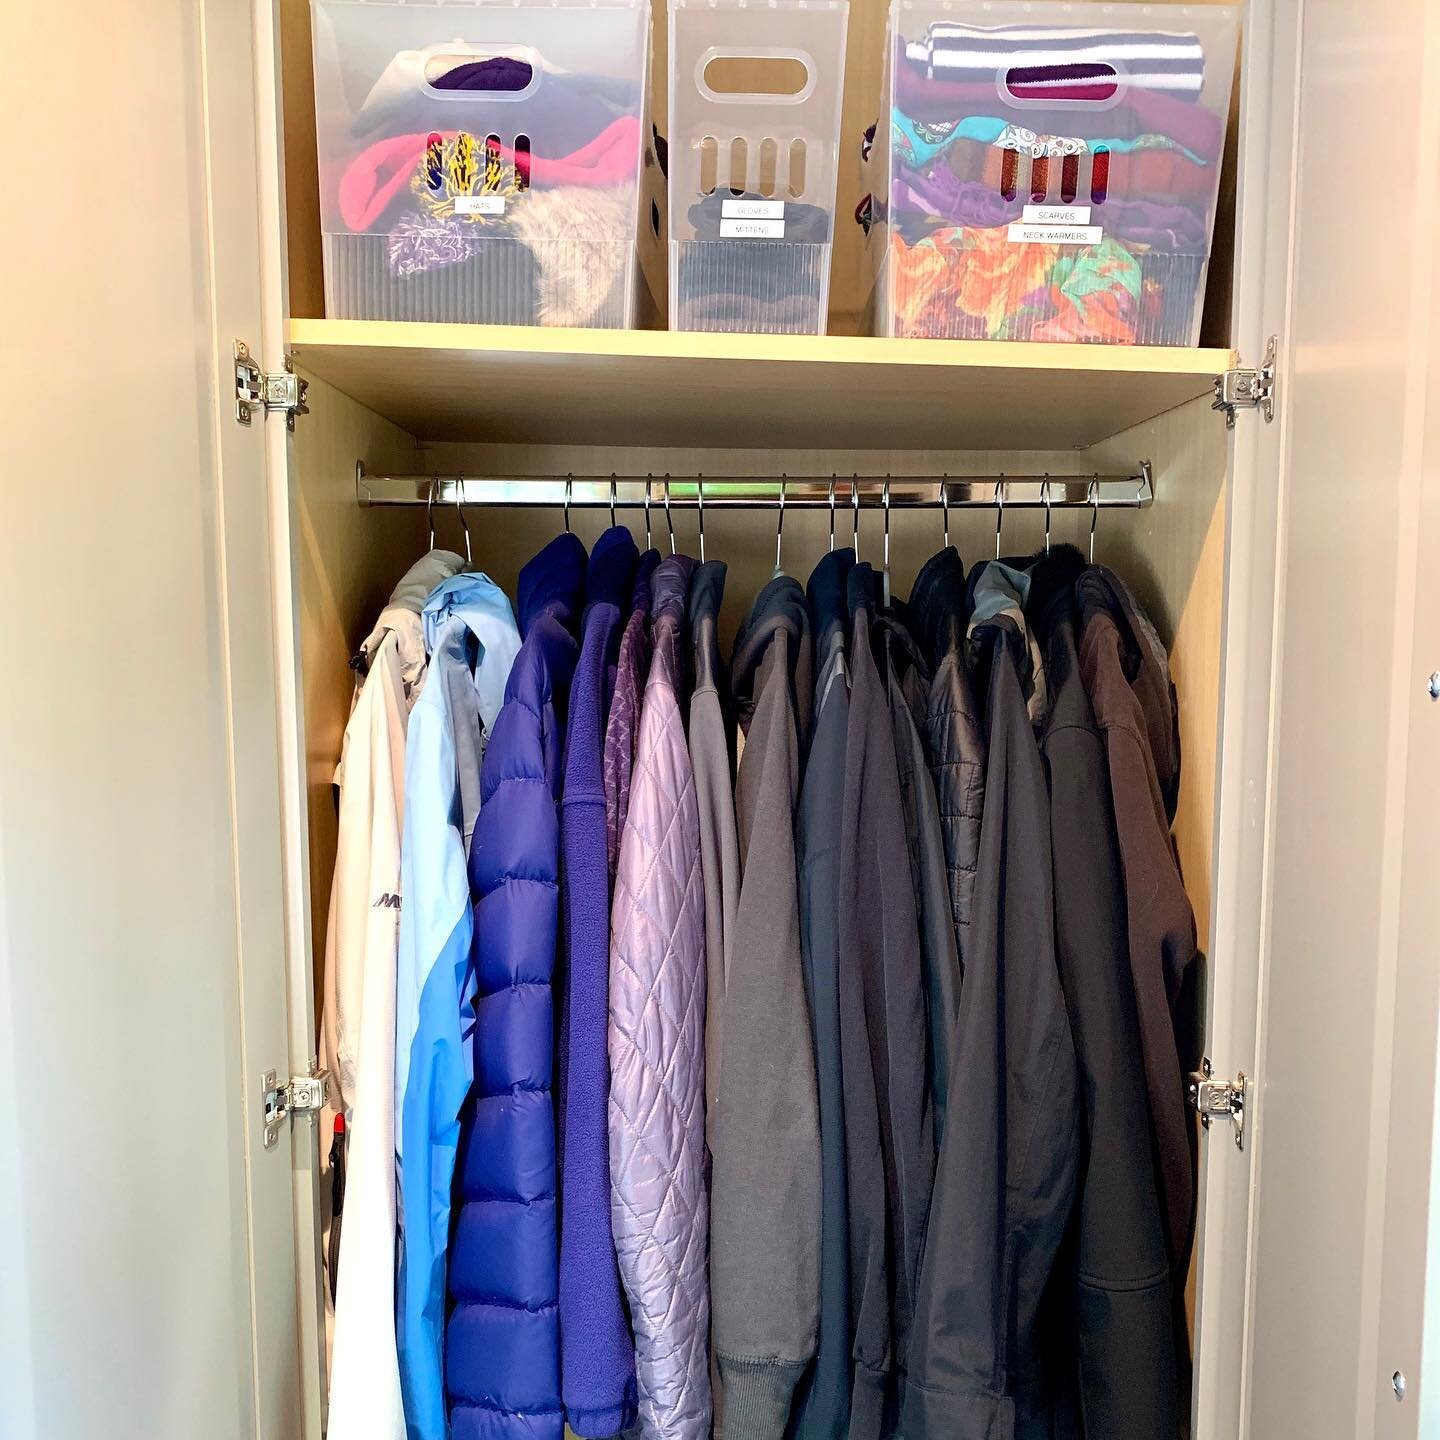 🍂Fall is definitely in the air. Time to get your coat closet organized as the weather turns colder. Start by decluttering and making room for the jackets you and your family actually wear. Consider donating others you no longer use. Create more spac